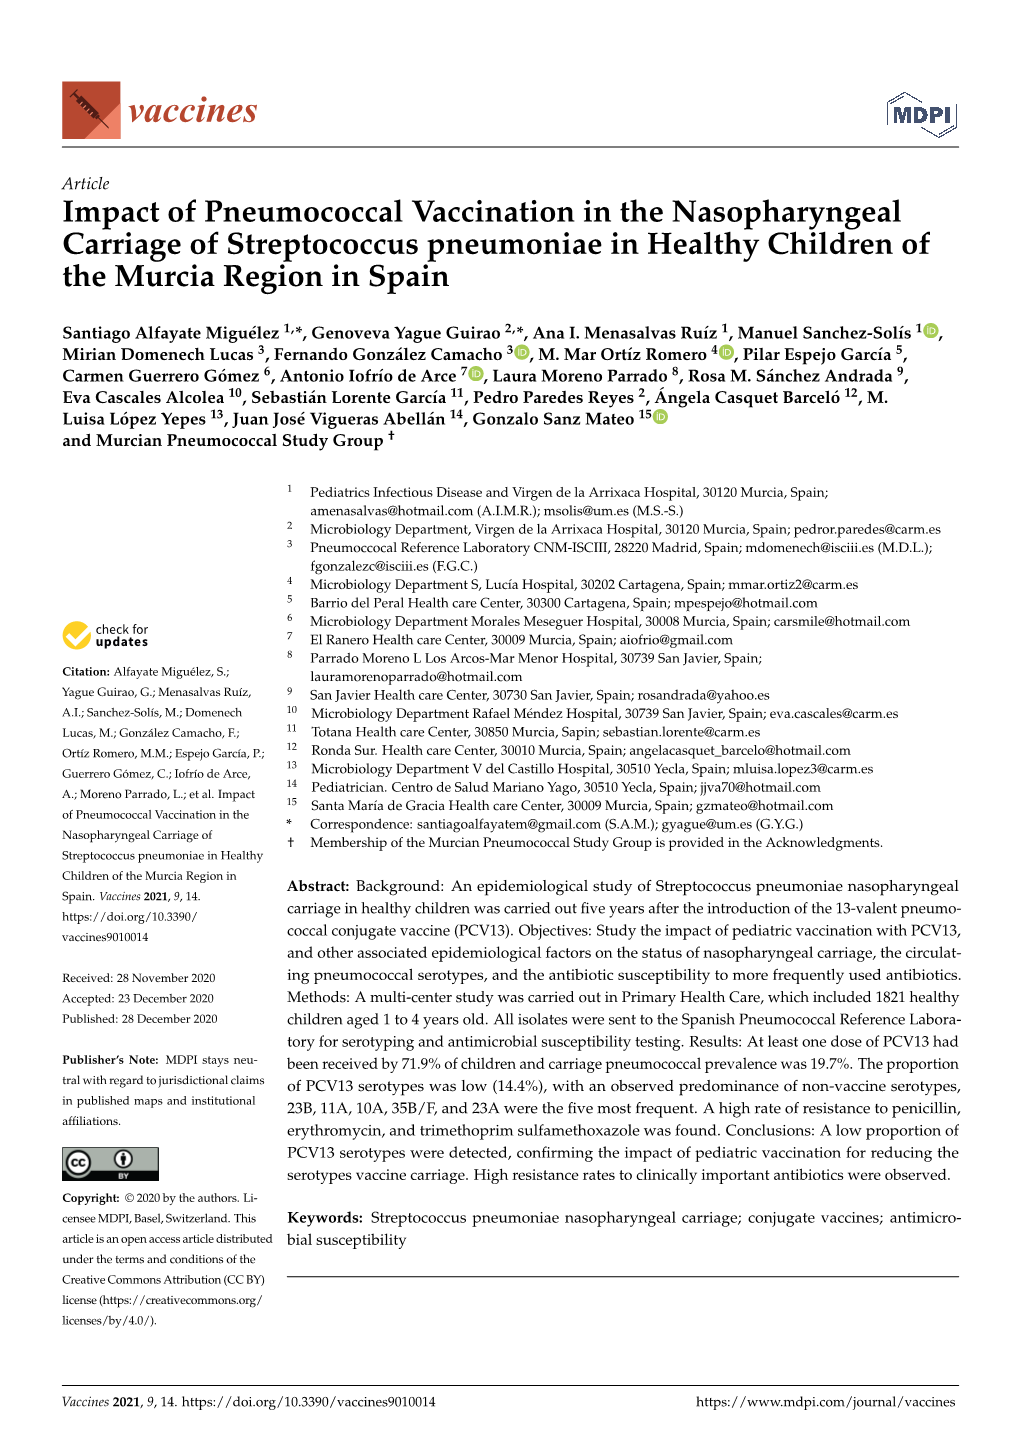 Impact of Pneumococcal Vaccination in the Nasopharyngeal Carriage of Streptococcus Pneumoniae in Healthy Children of the Murcia Region in Spain